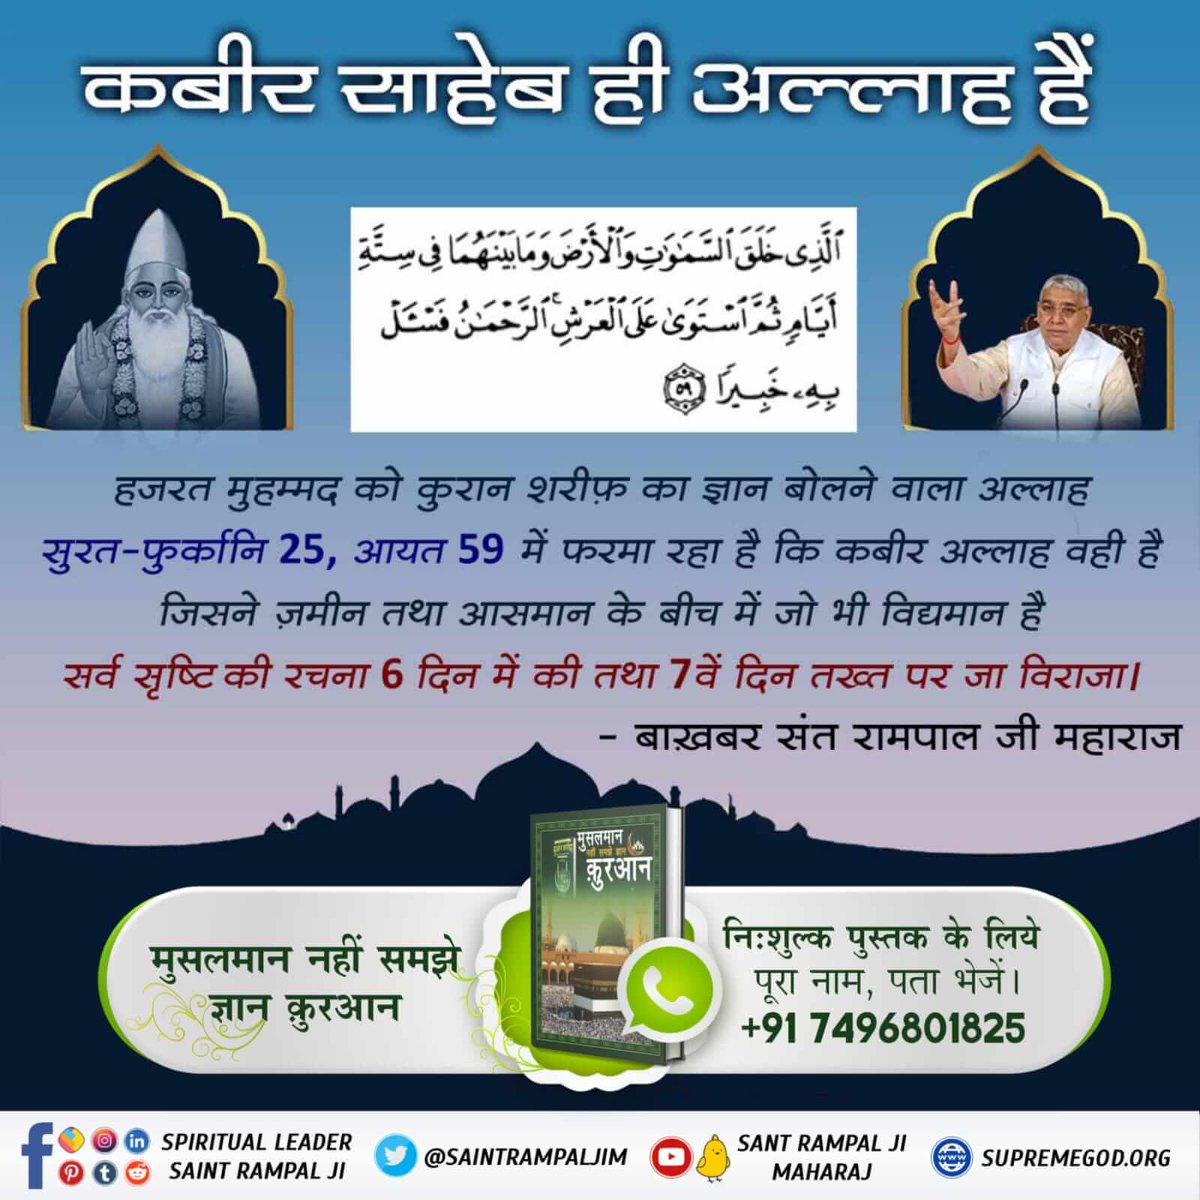 #GodMorningSaturday
Muslims praise Allah as ‘la ilaha illa Allah’ which means ‘There is no Deity but God’. They also say ‘Allahu Akbar’ means ‘God is greater’.
But question is 'Who is Allahu Akbar'?
What is his name?
Watch Sadhna tv at 7.30 pm for answers
Baakhabar Sant Rampal Ji